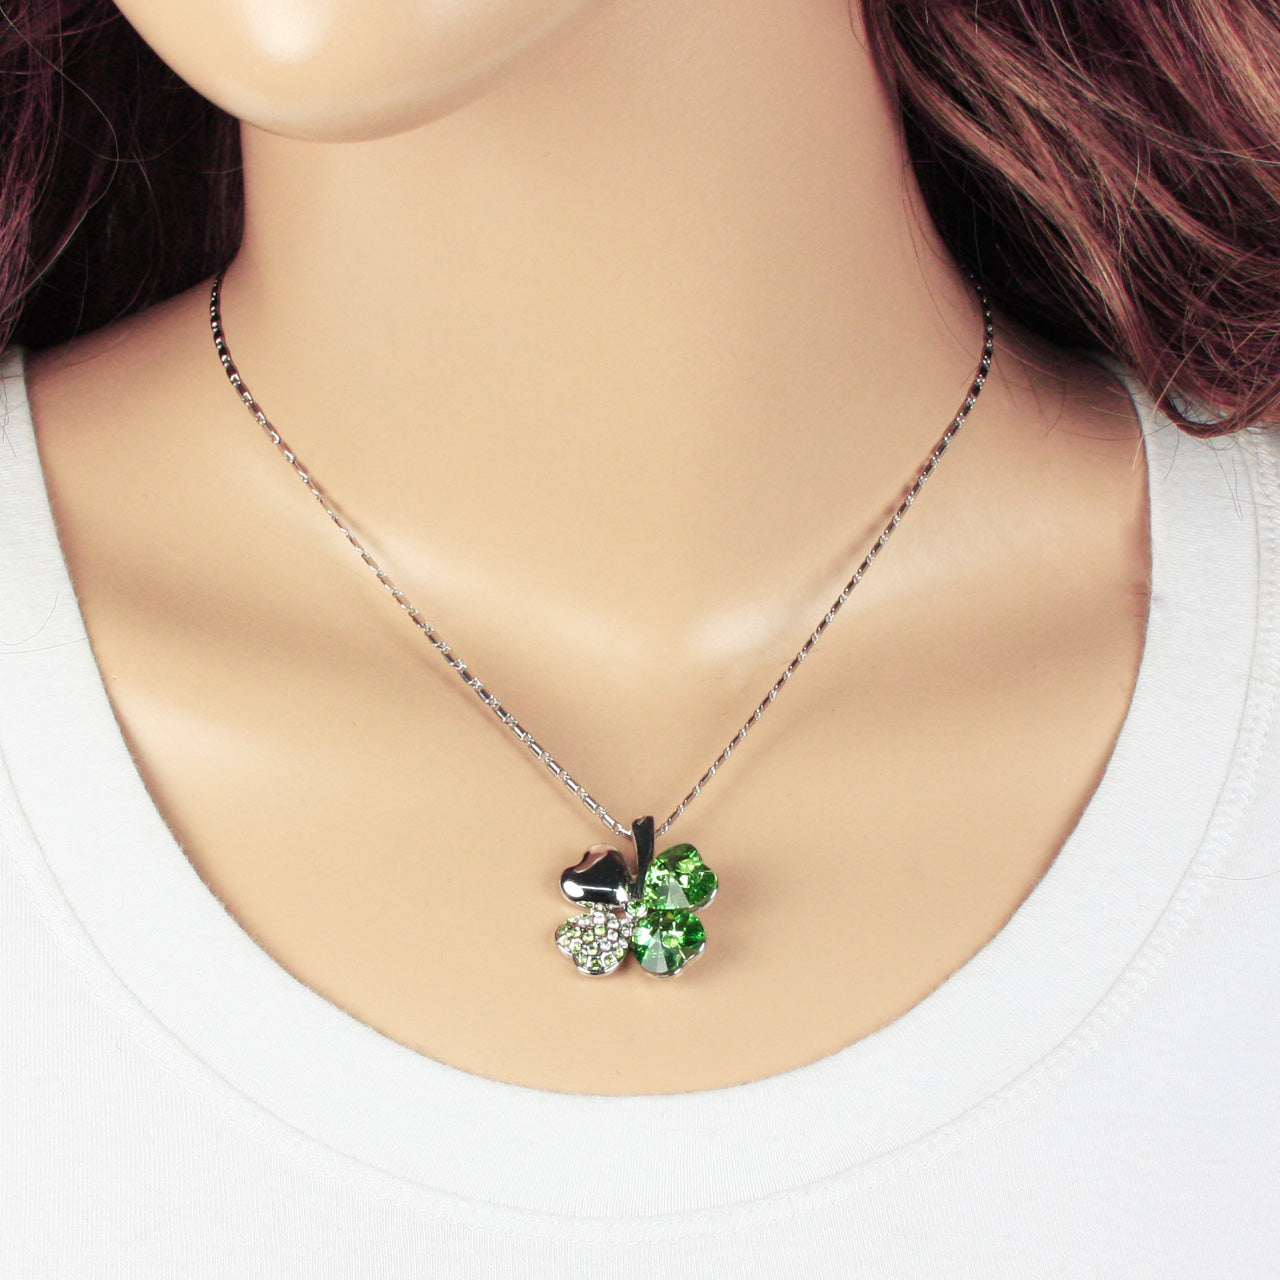 Four Leaf Clover Pendant Necklace and Earrings Set